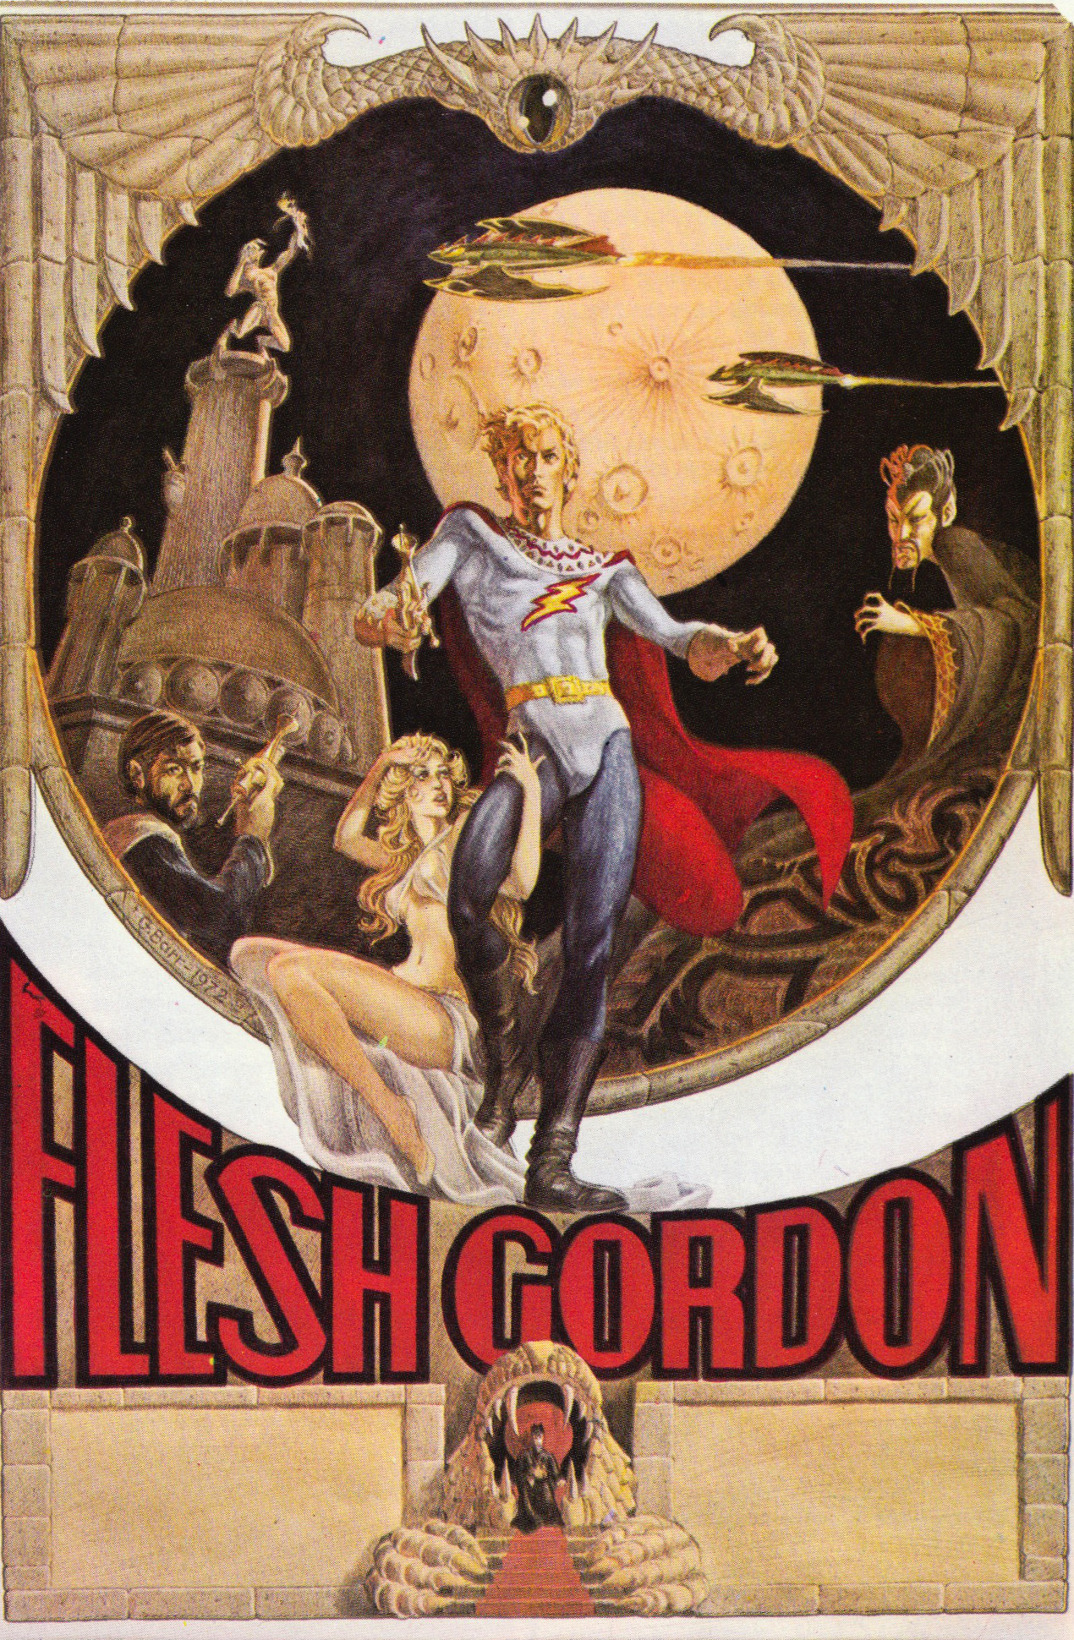 Flesh Gordon, preliminary study for the movie poster by George Barr. From The Visual